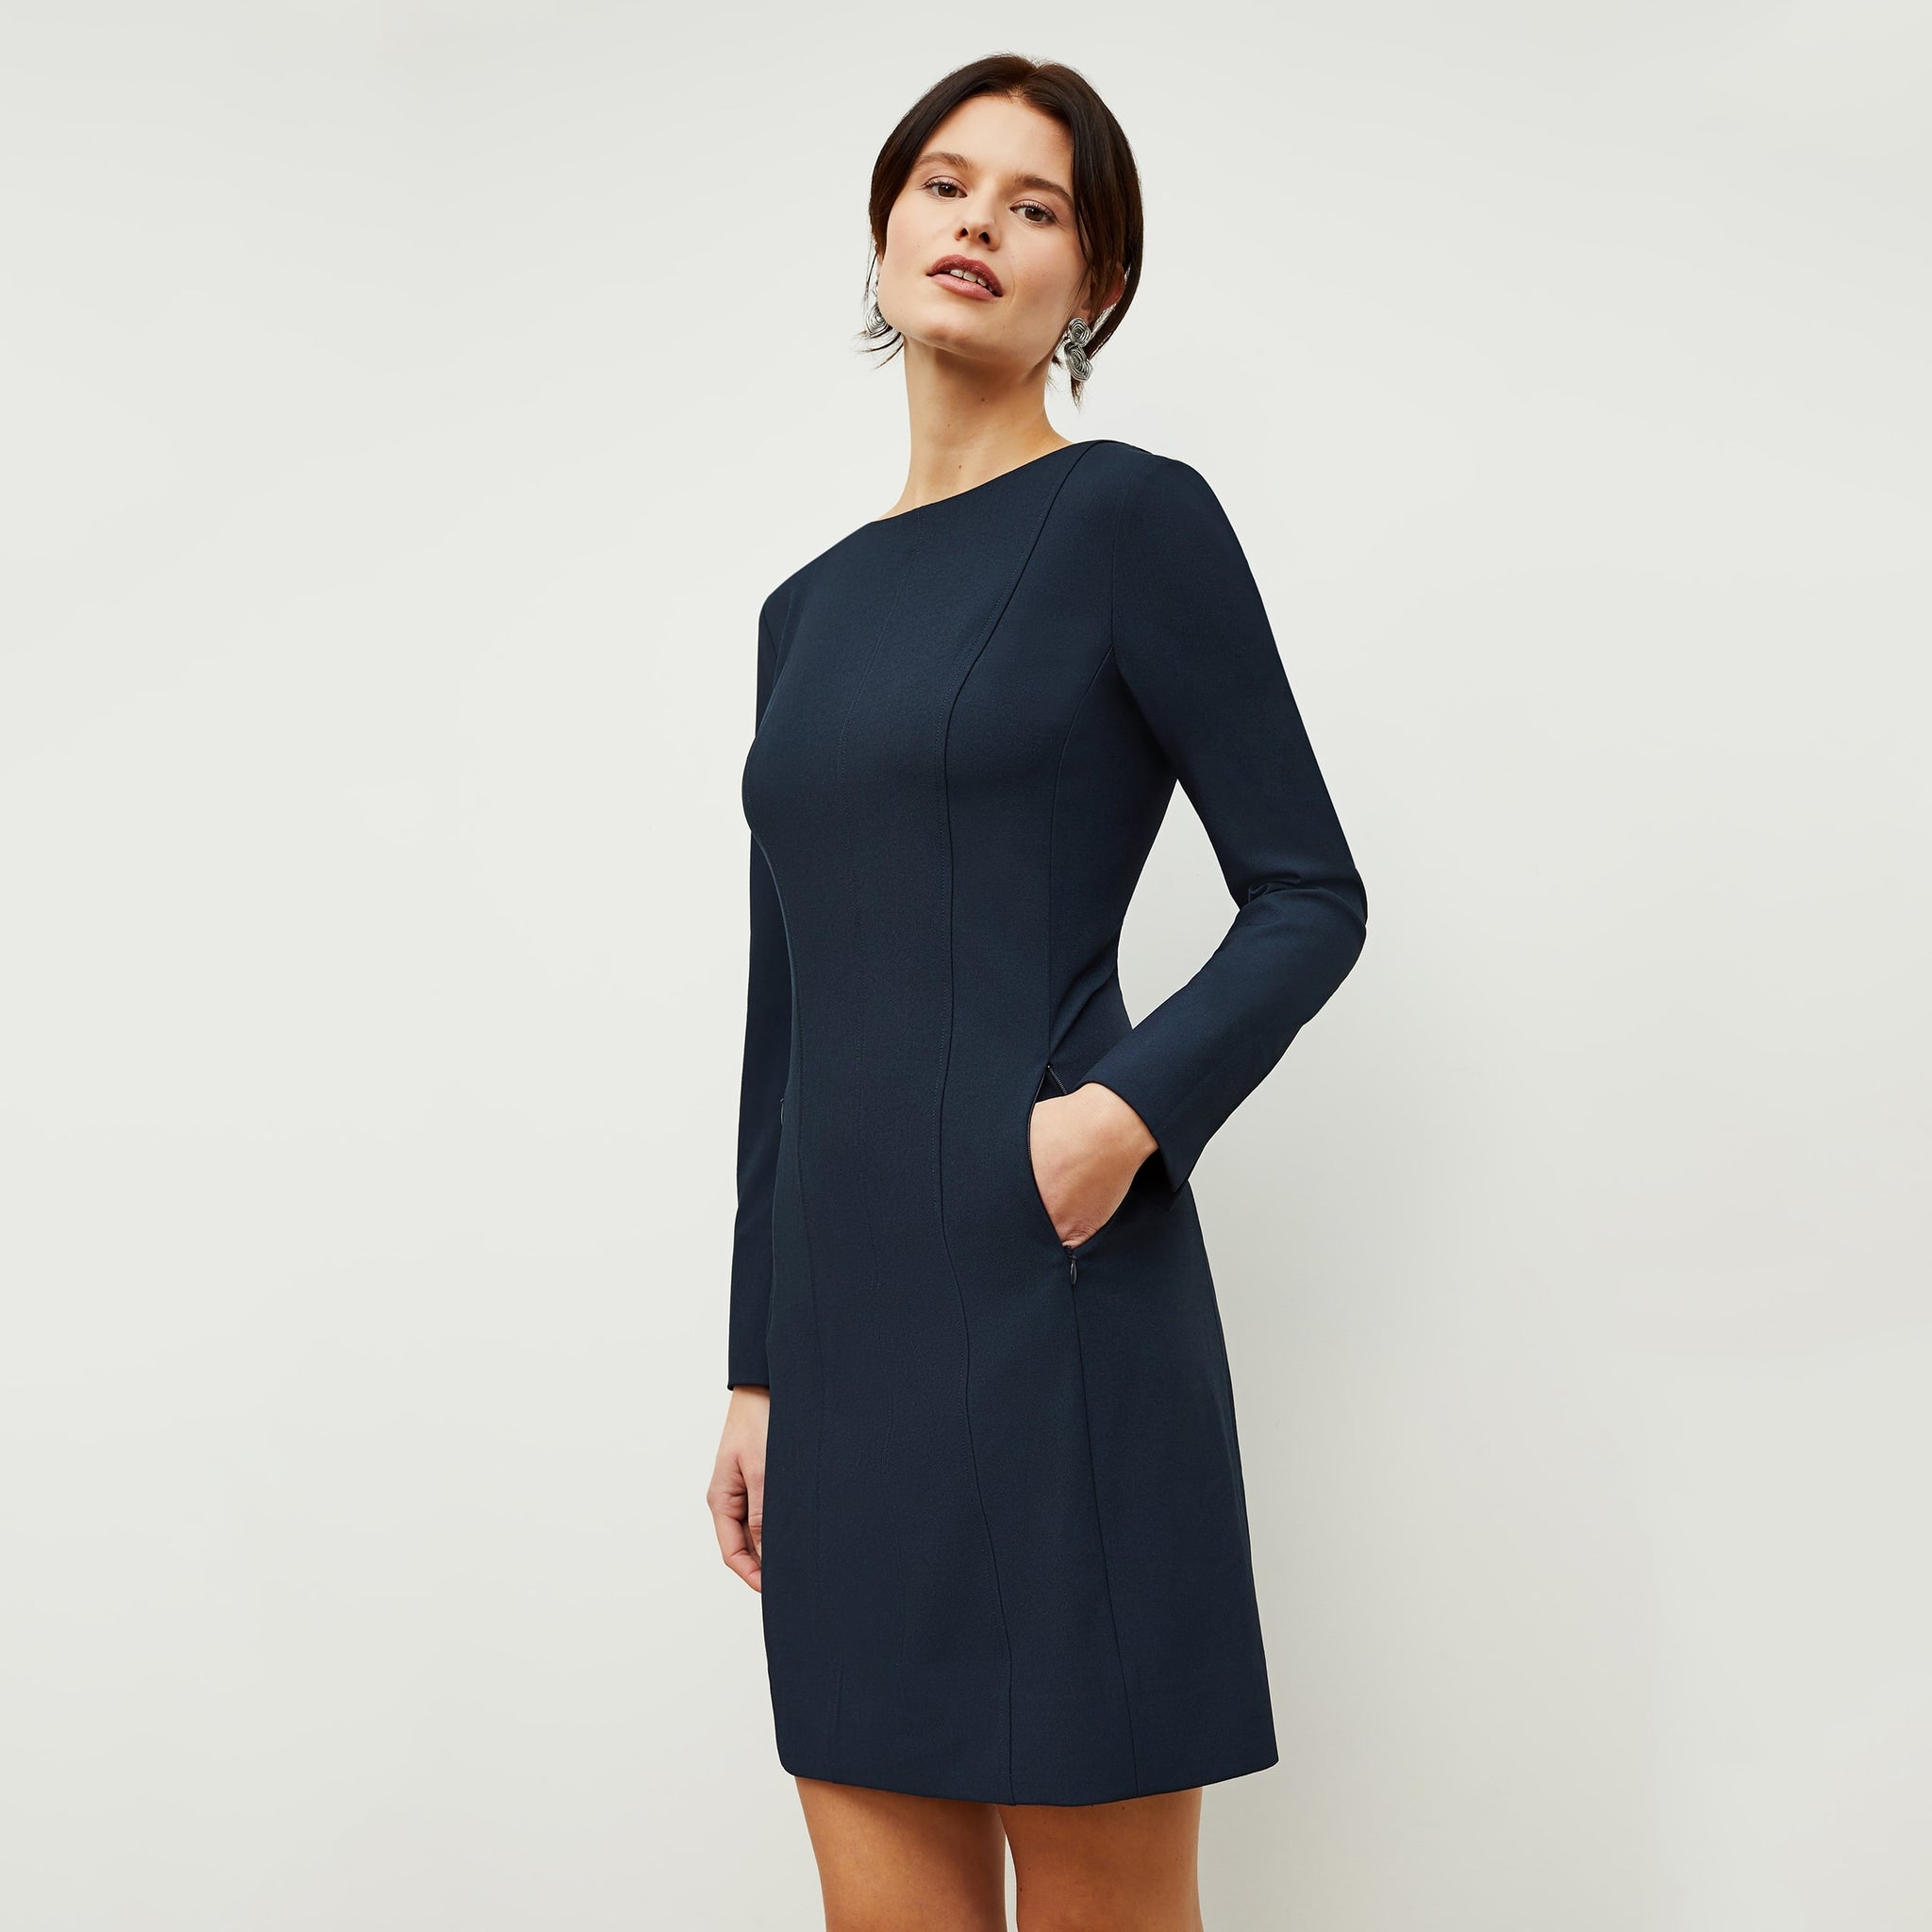 Side image of a woman standing wearing the Novara Dress—Recycled WonderTex in Midnight 